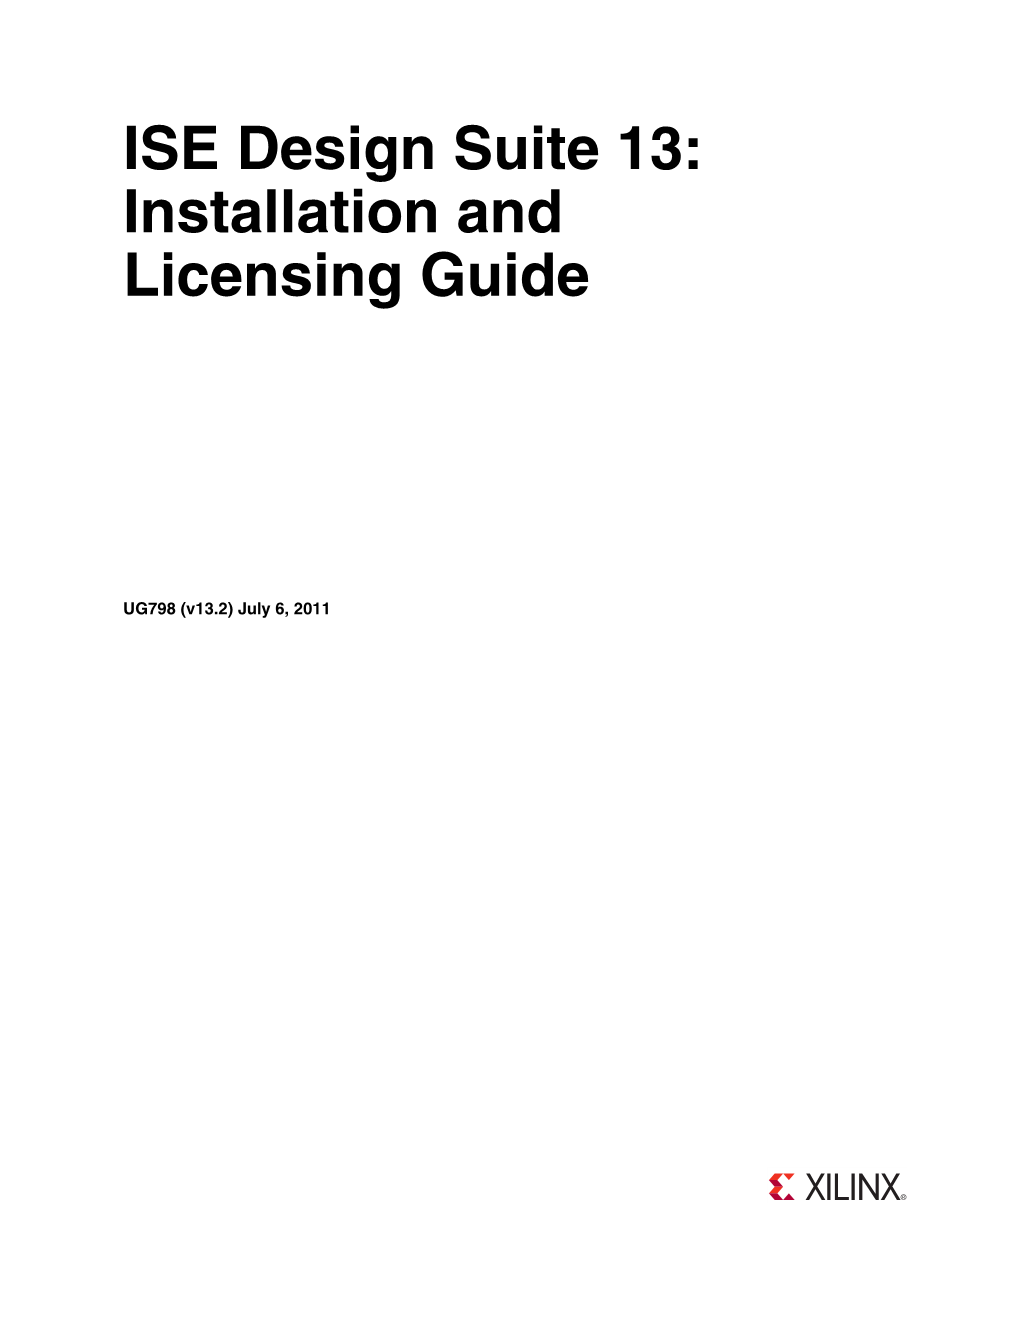 Xilinx ISE Design Suite 13: Installation and Licensing Guide